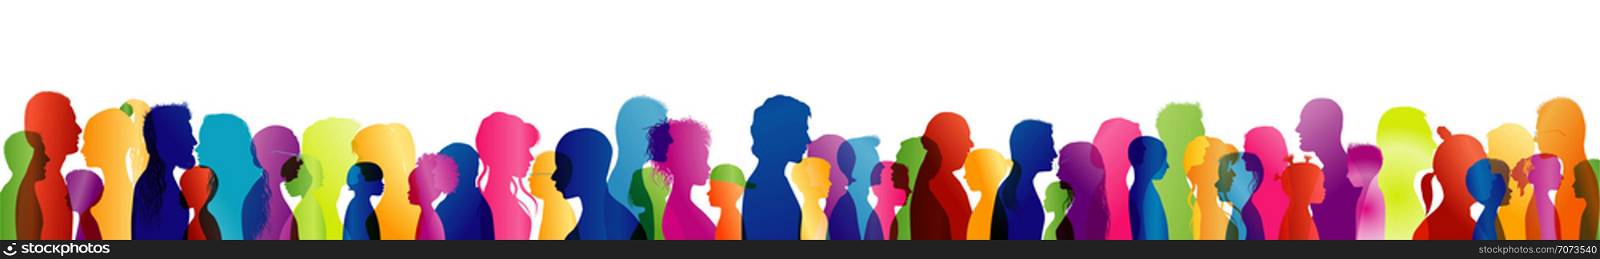 Concept of solidarity or communication between different people and of different ages and multi-ethnic. Silhouette colored profile heads. Multiple exposure. Dialogue crowd of many people